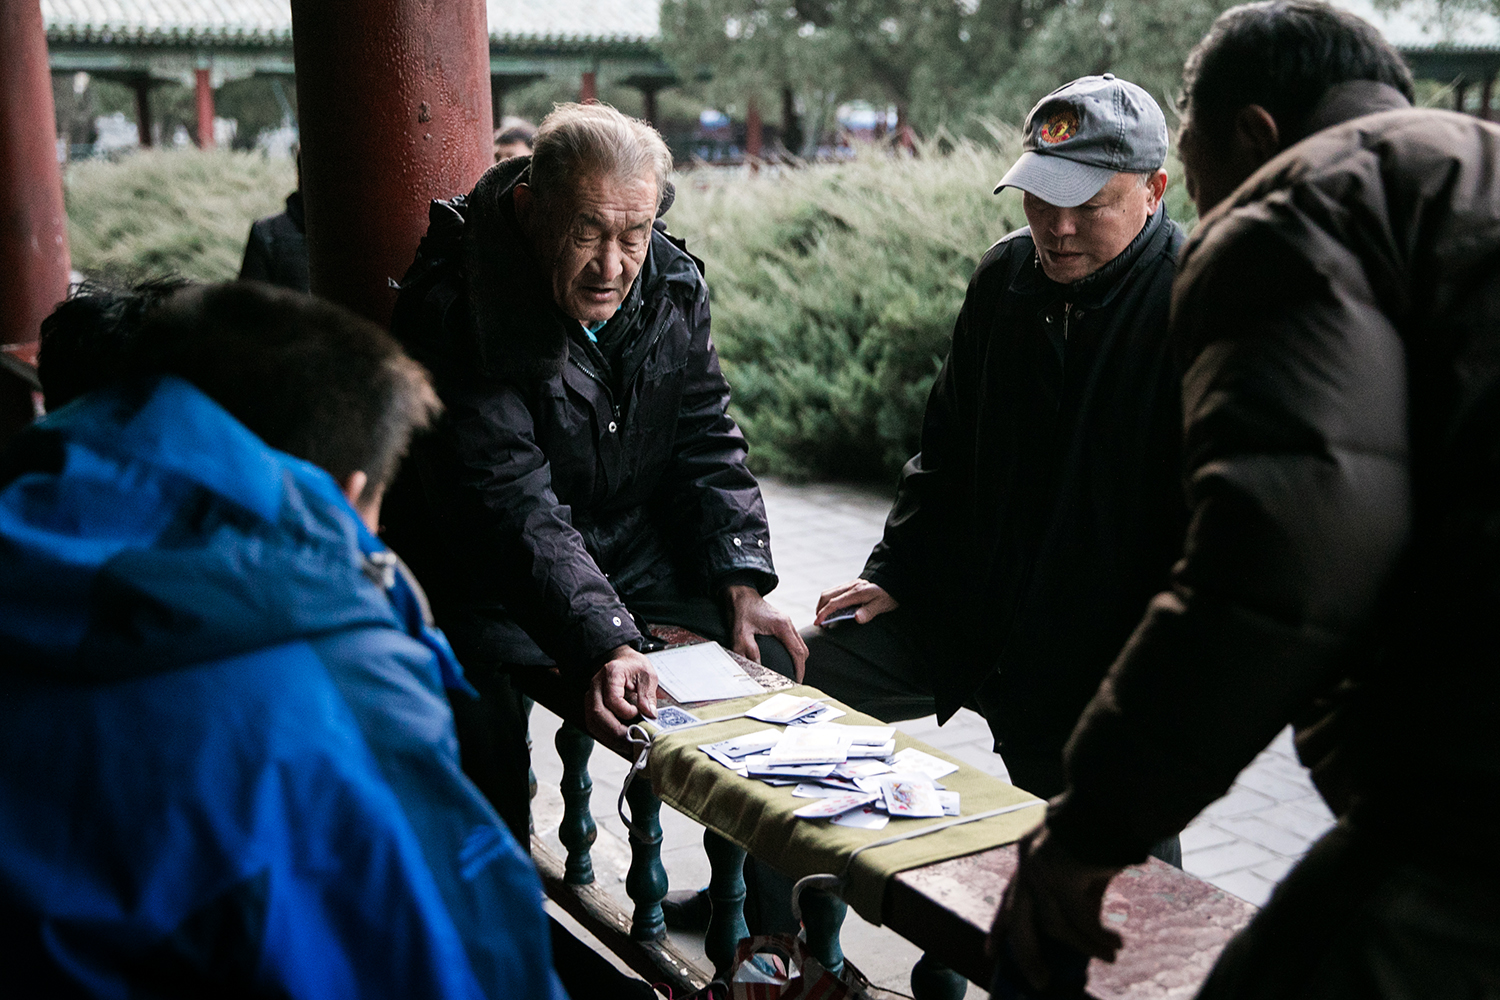 An elderly man lays down his cards to play as two young boys watch intently. Even with new technology, there is a sense of value in a more simplistic way of leisure time, and it goes beyond generations.